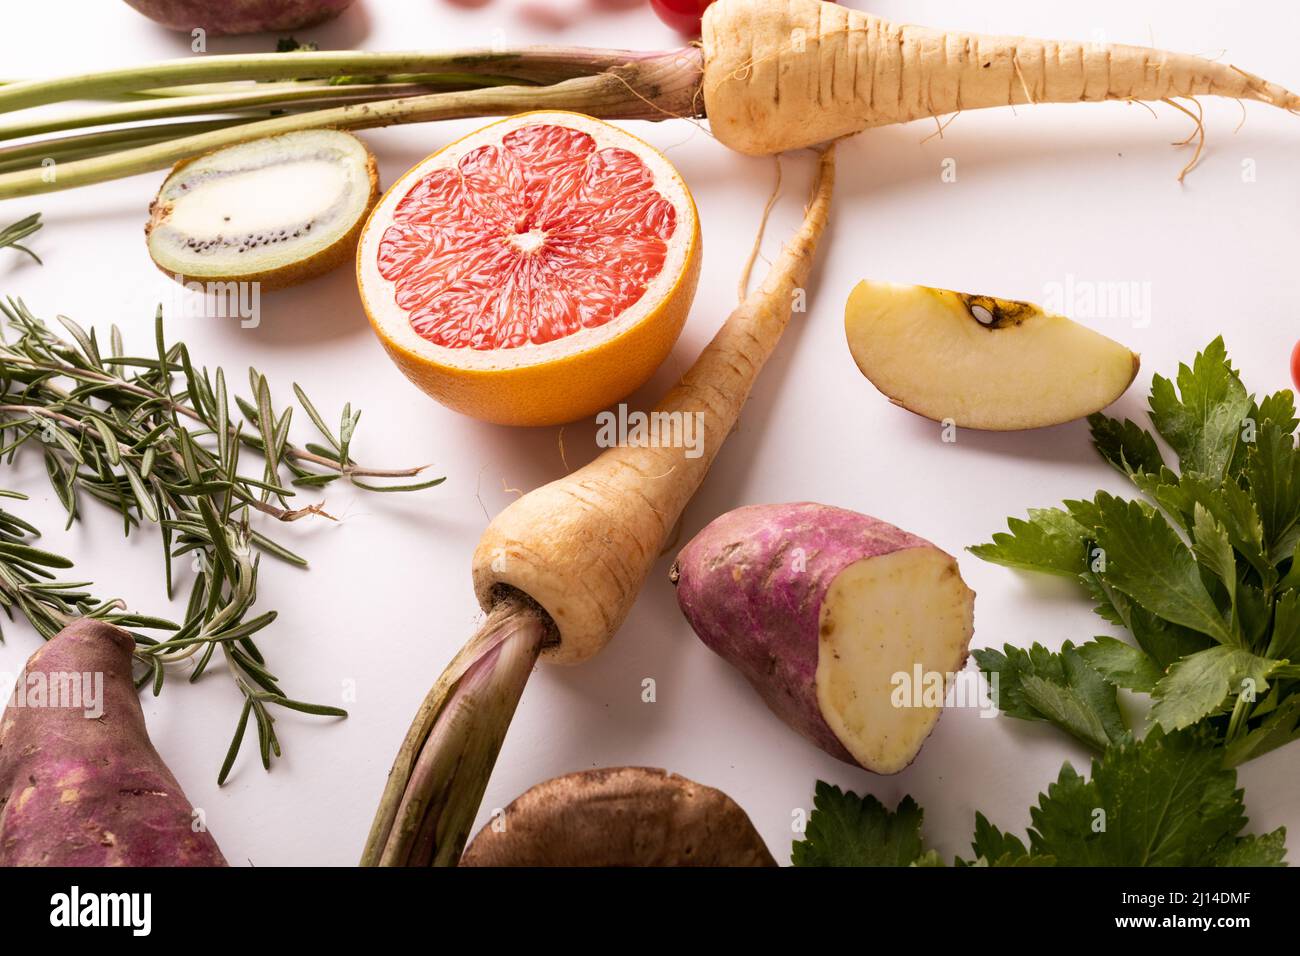 High angle close-up view of fresh vegetables and fruits on white background Stock Photo